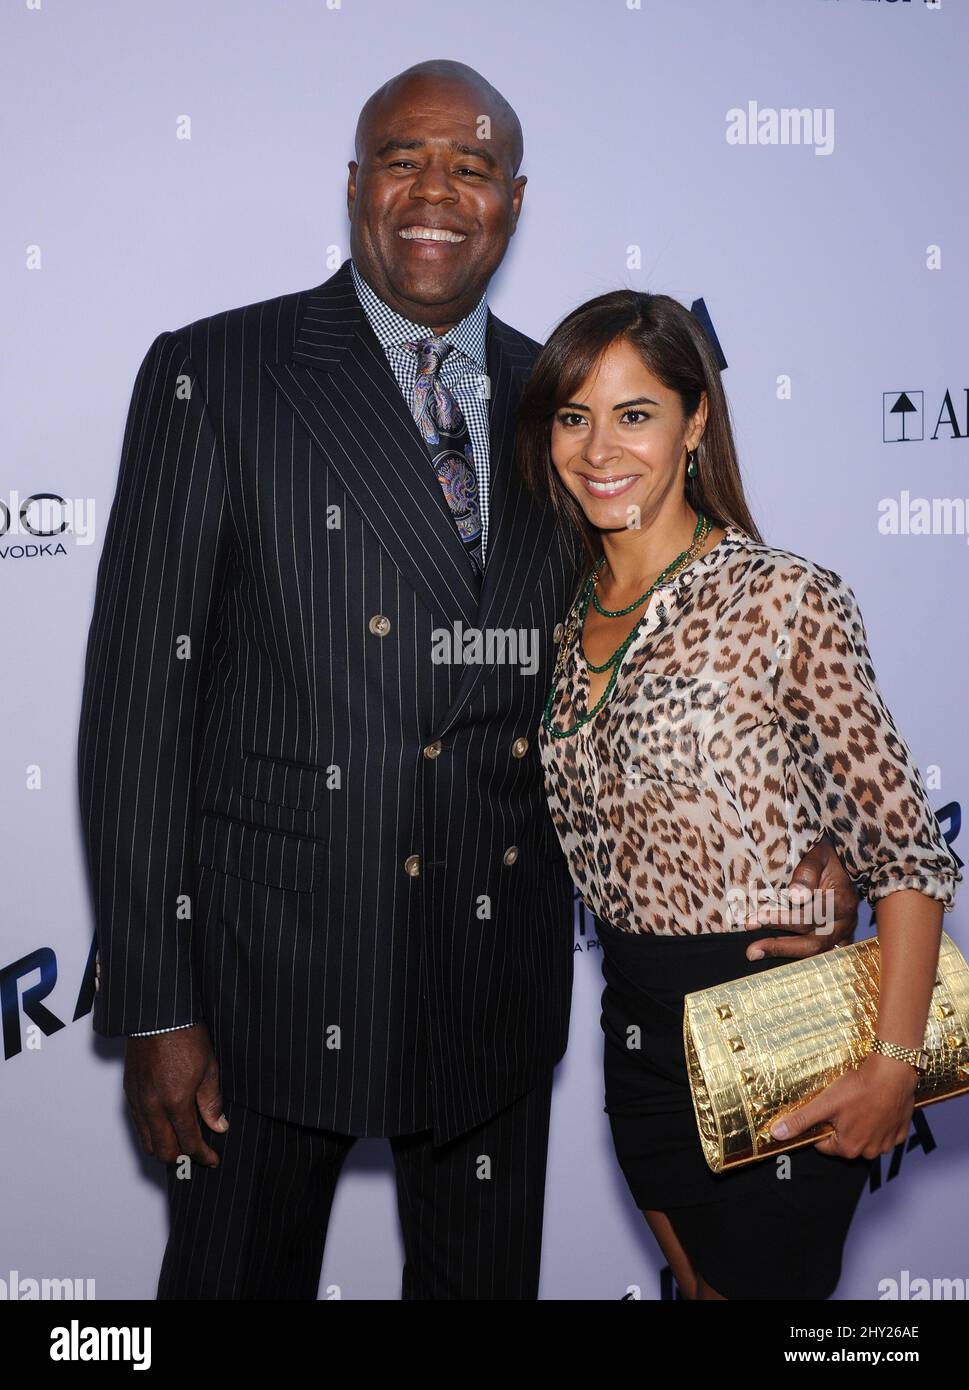 Chi McBride & Julissa Mcbride attends the 'Paranoia' US premiere held at the Directors Guild of America, Los Angeles. Stock Photo